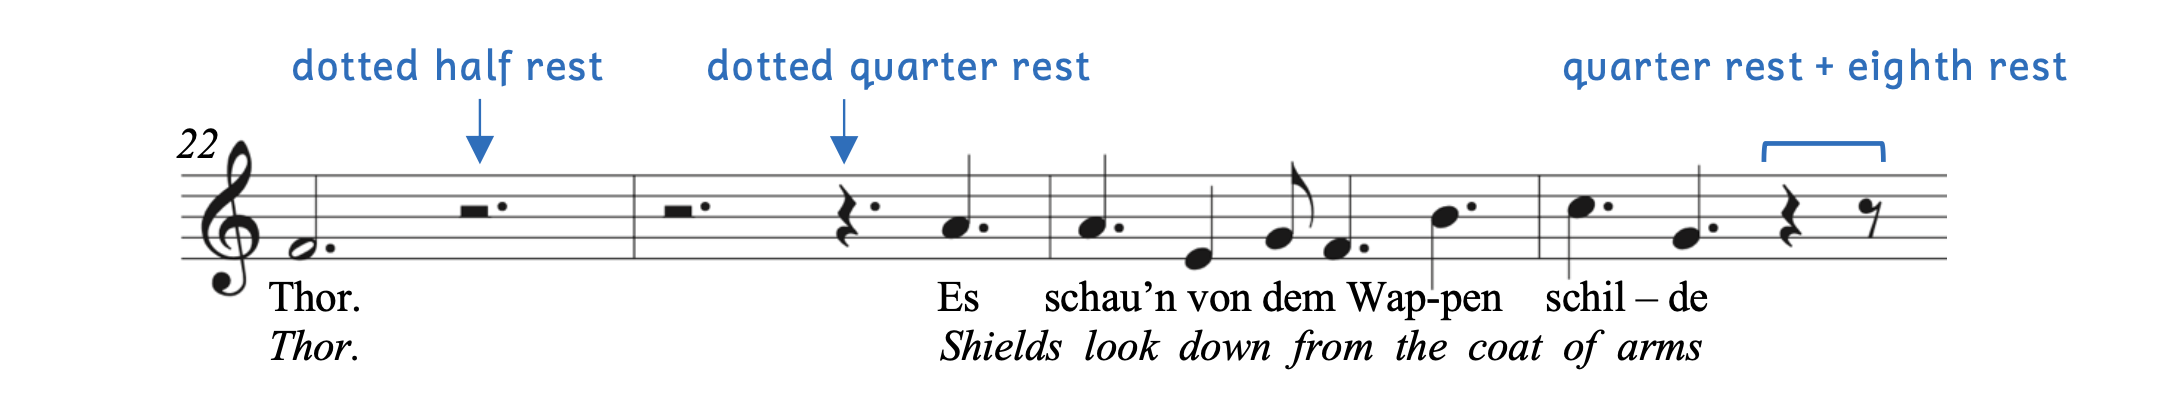 Example showing different dotted rests in a real music example. There is a dotted half rest, a dotted quarter rest, a quarter rest paired with an eighth rest.